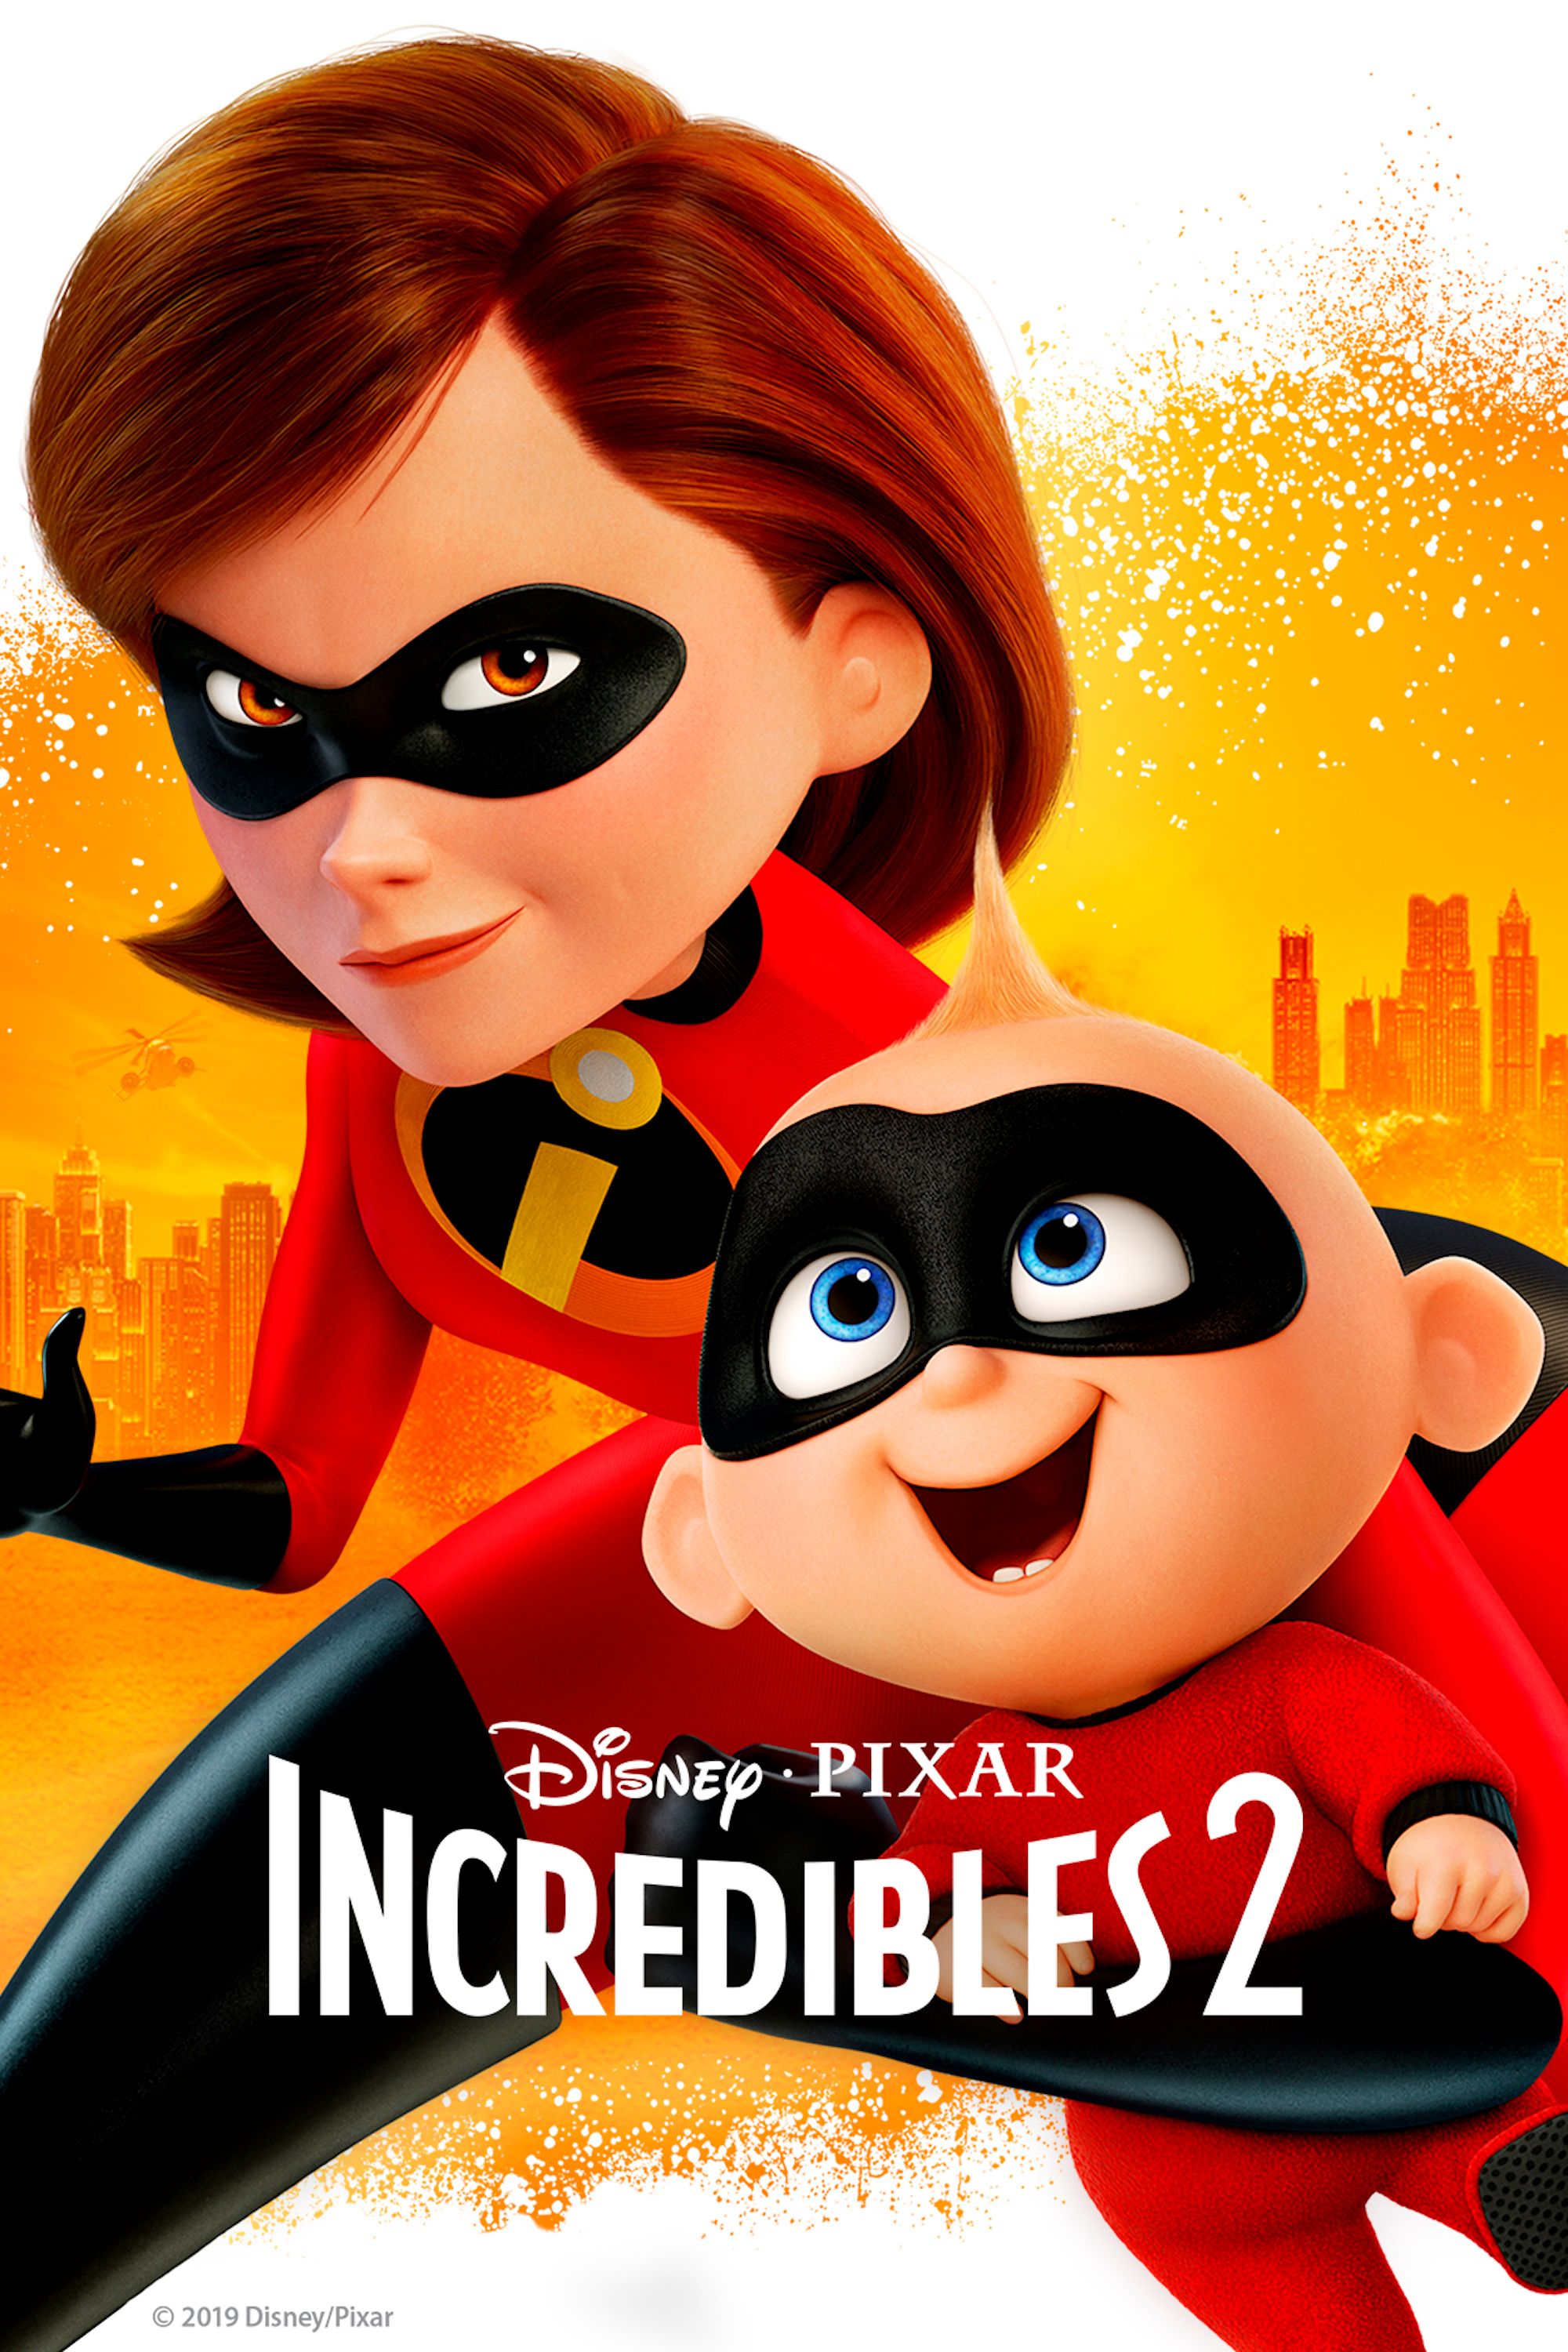 Incredibles 2 Full Movie Movies Anywhere It was owned by several entities, from manjeet sandhu to mohandas kumar of mohandas, it was hosted. incredibles 2 full movie movies